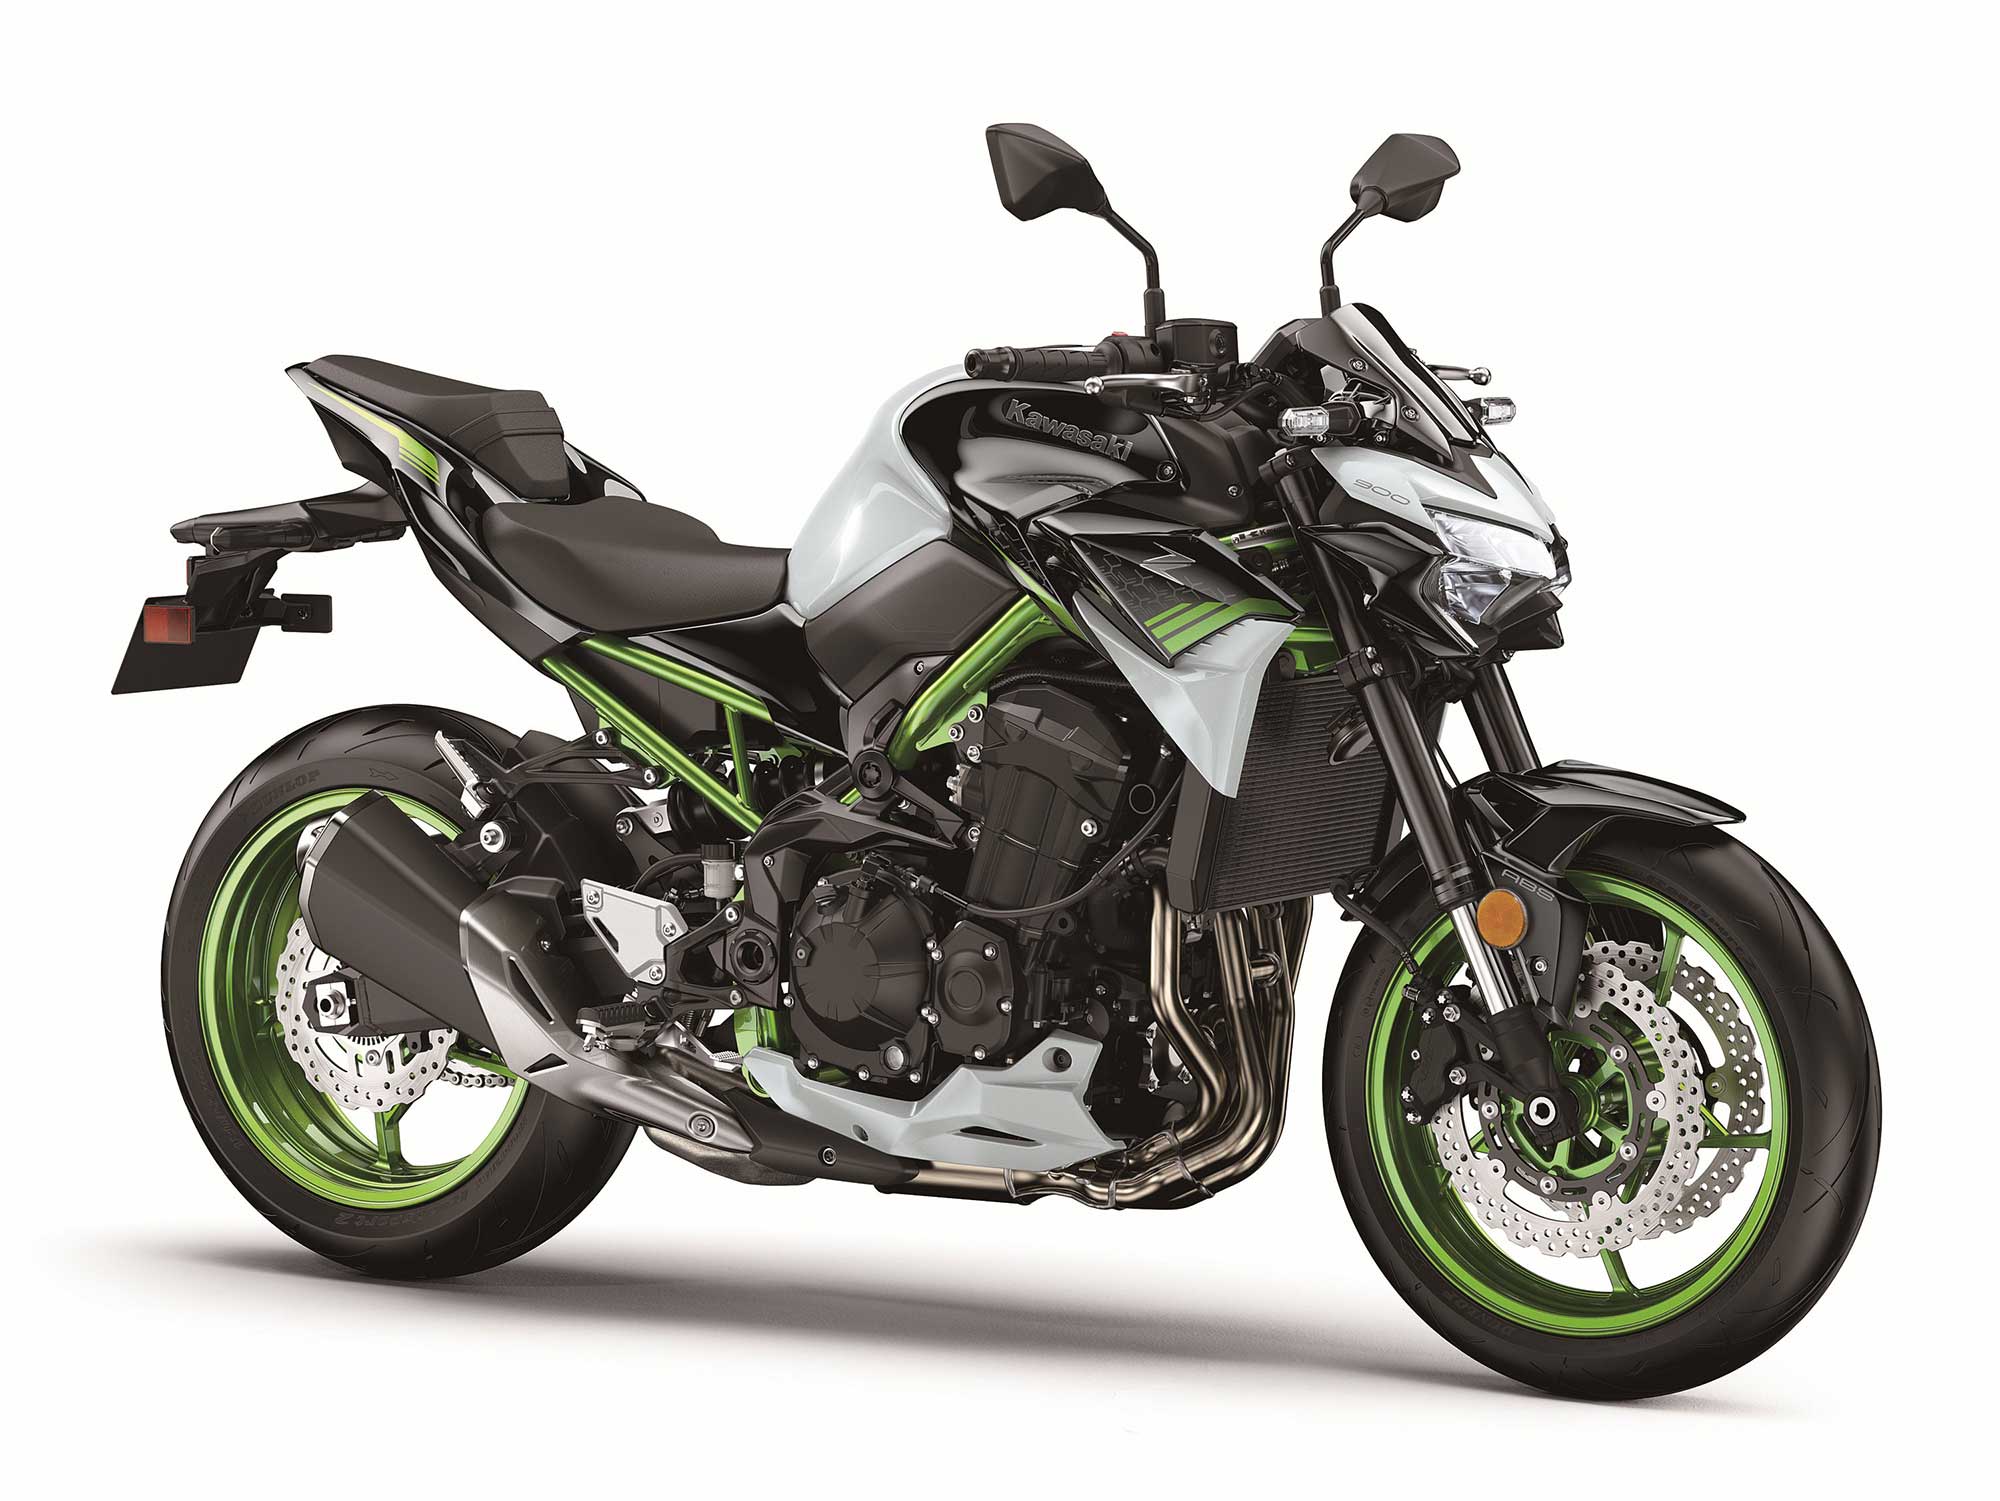 Reporter Troubled Sommerhus 2021 Kawasaki Z900 ABS Buyer's Guide: Specs, Photos, Price | Cycle World